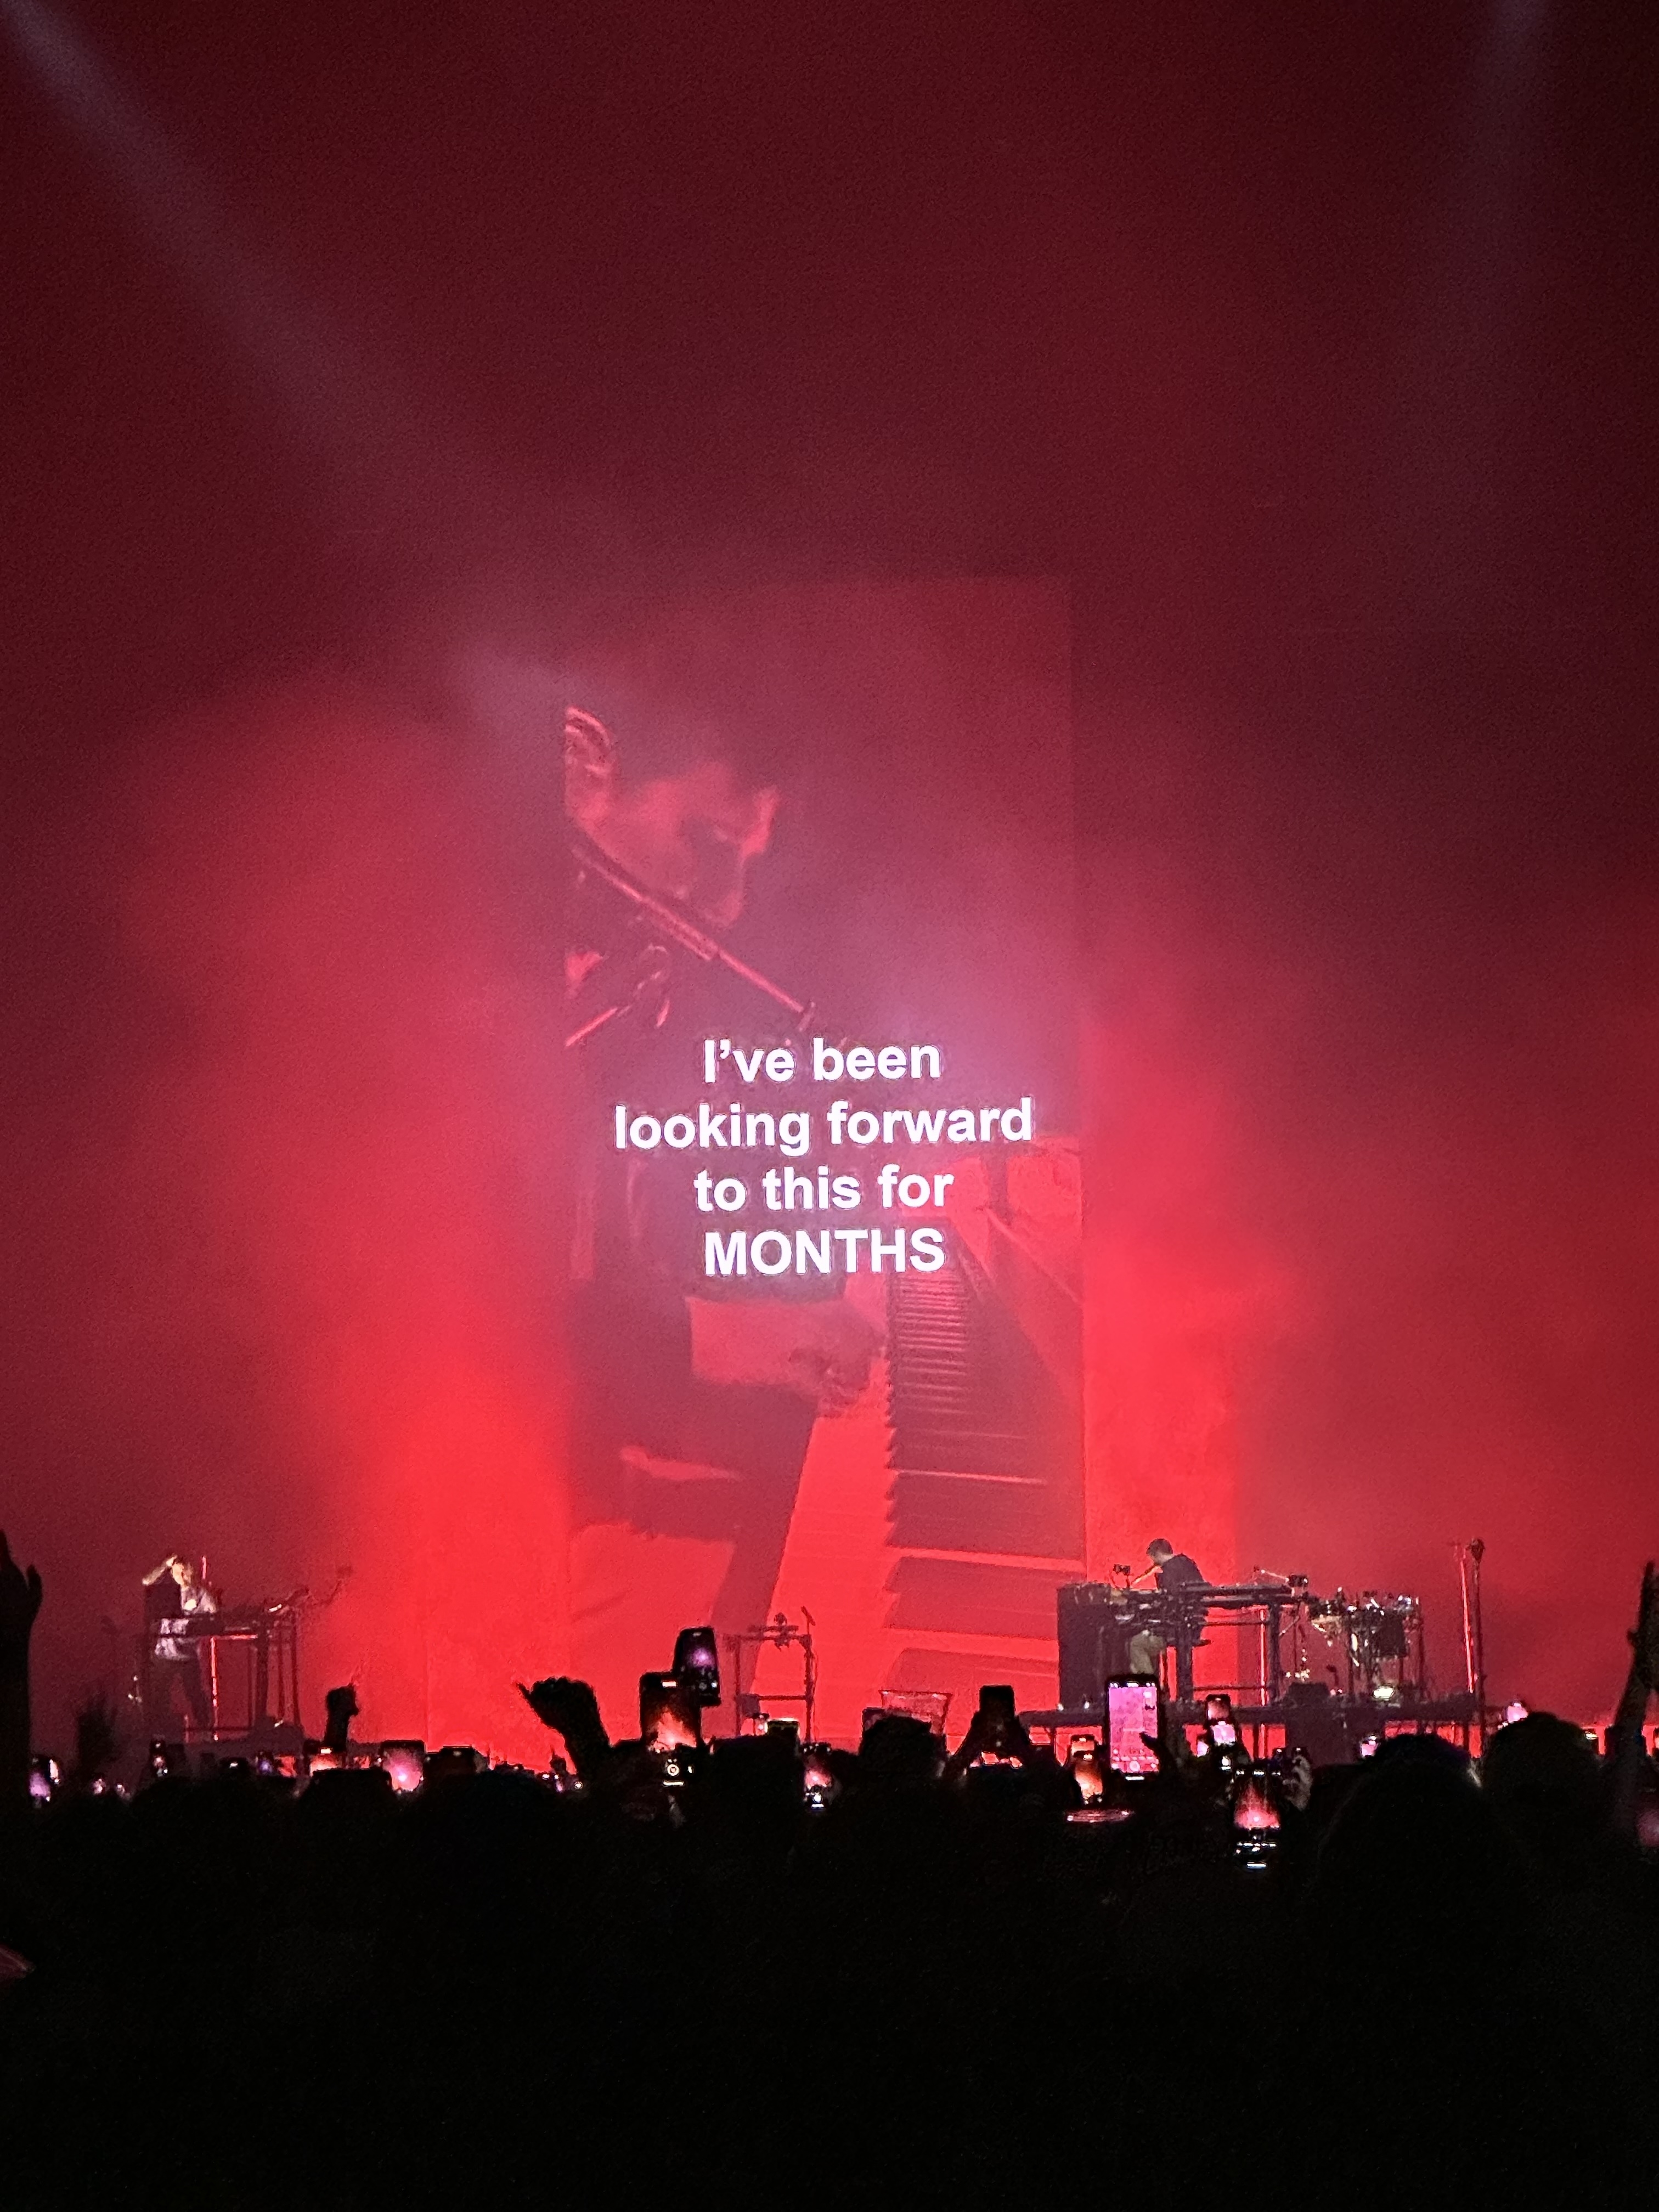 Concert stage with a large screen displaying a message, &quot;I&#x27;ve been looking forward to this for MONTHS,&quot; silhouettes of crowd and band